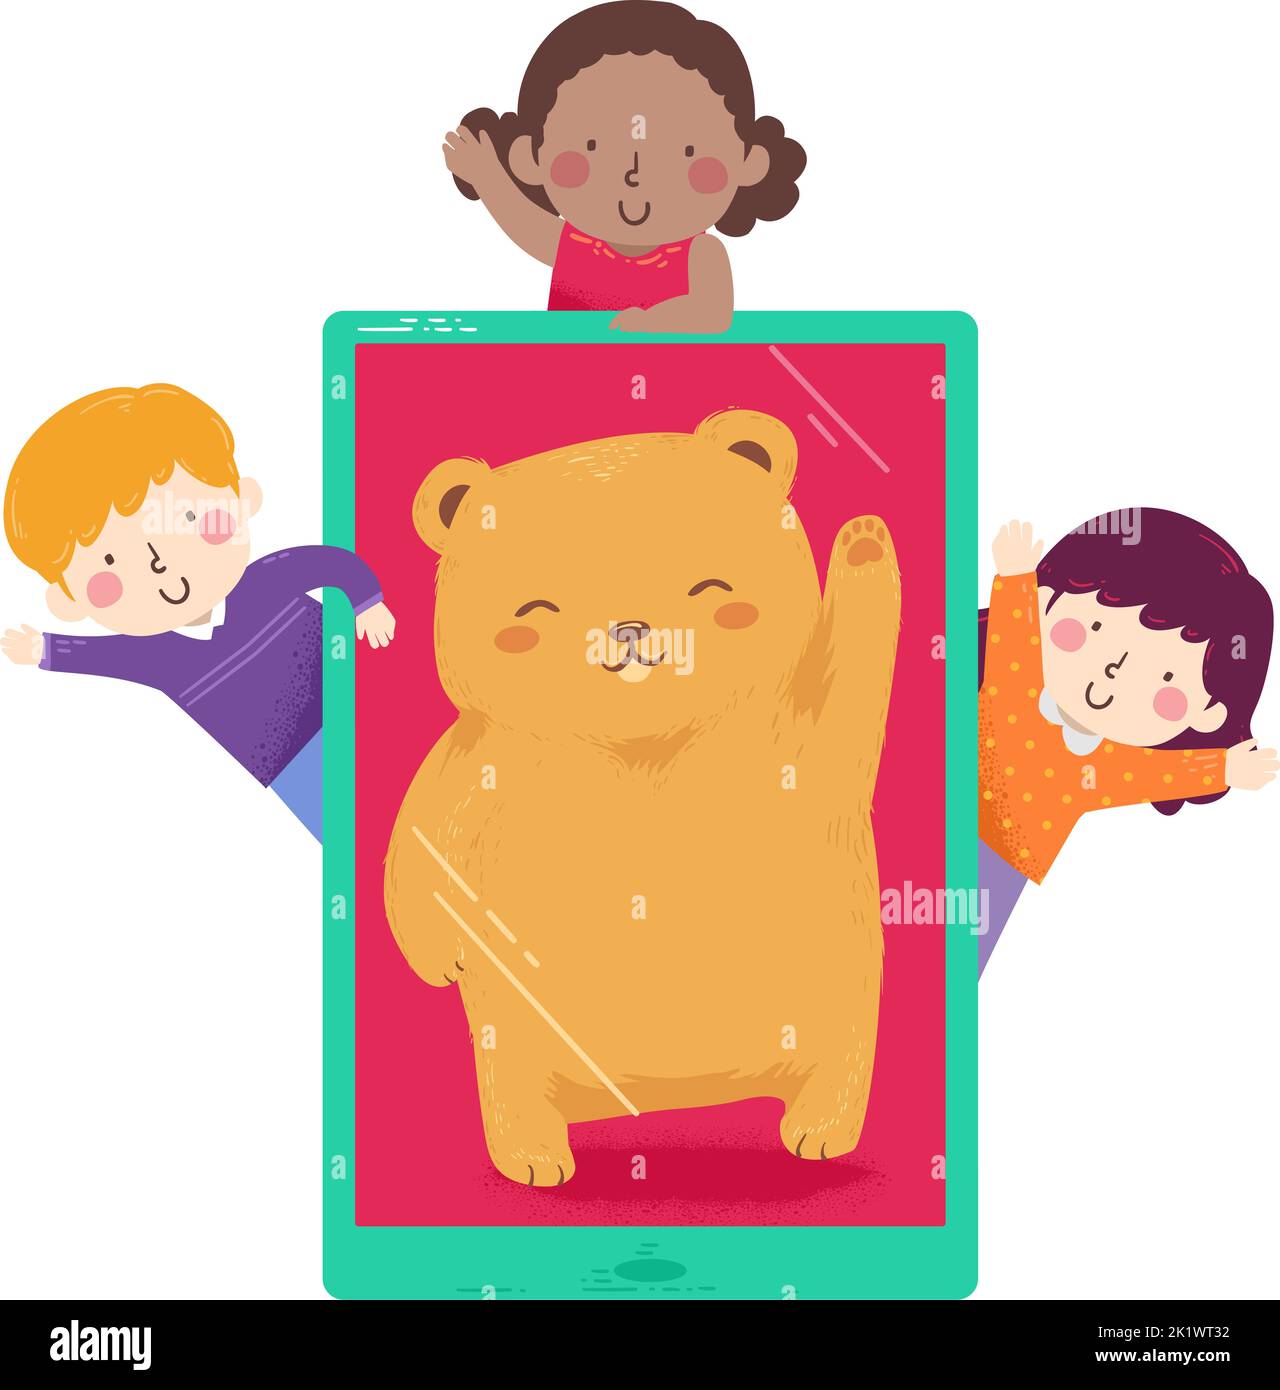 Illustration of Kids Waving with a Big Tablet or Mobile Phone with a Teddy Bear Stuffed Toy Waving Stock Photo